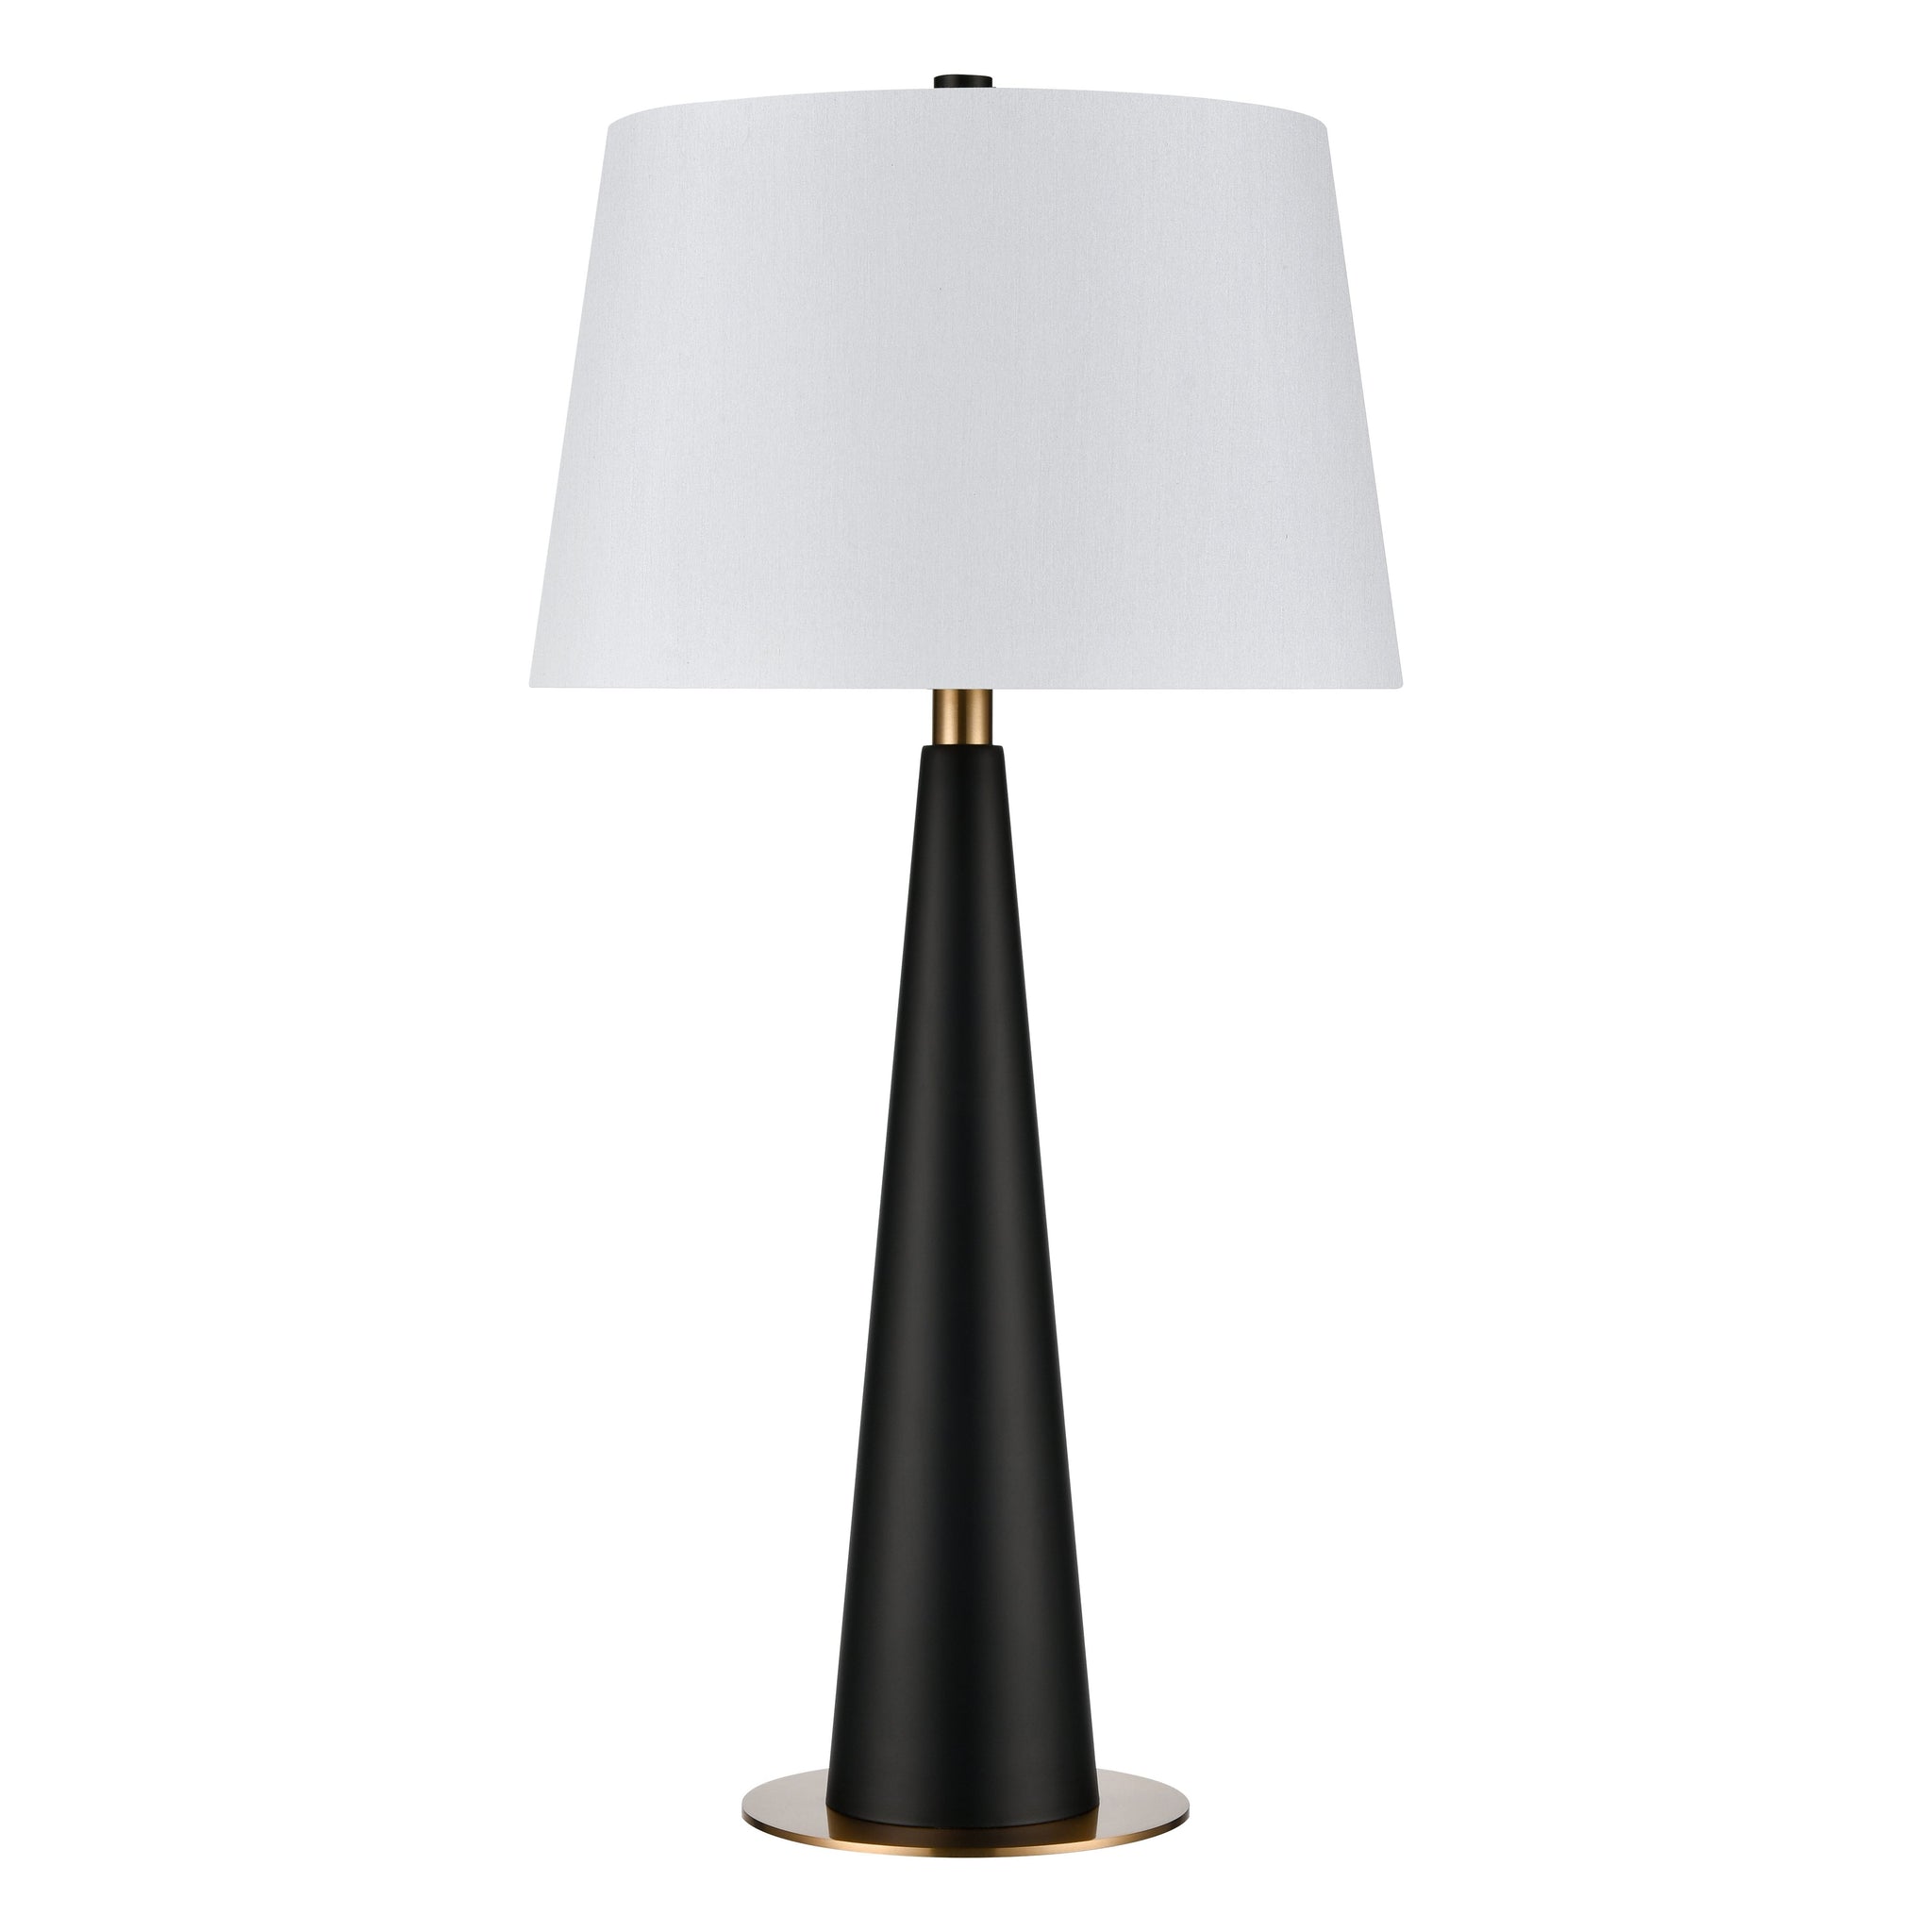 Case In Point 35" High 1-Light Table Lamp